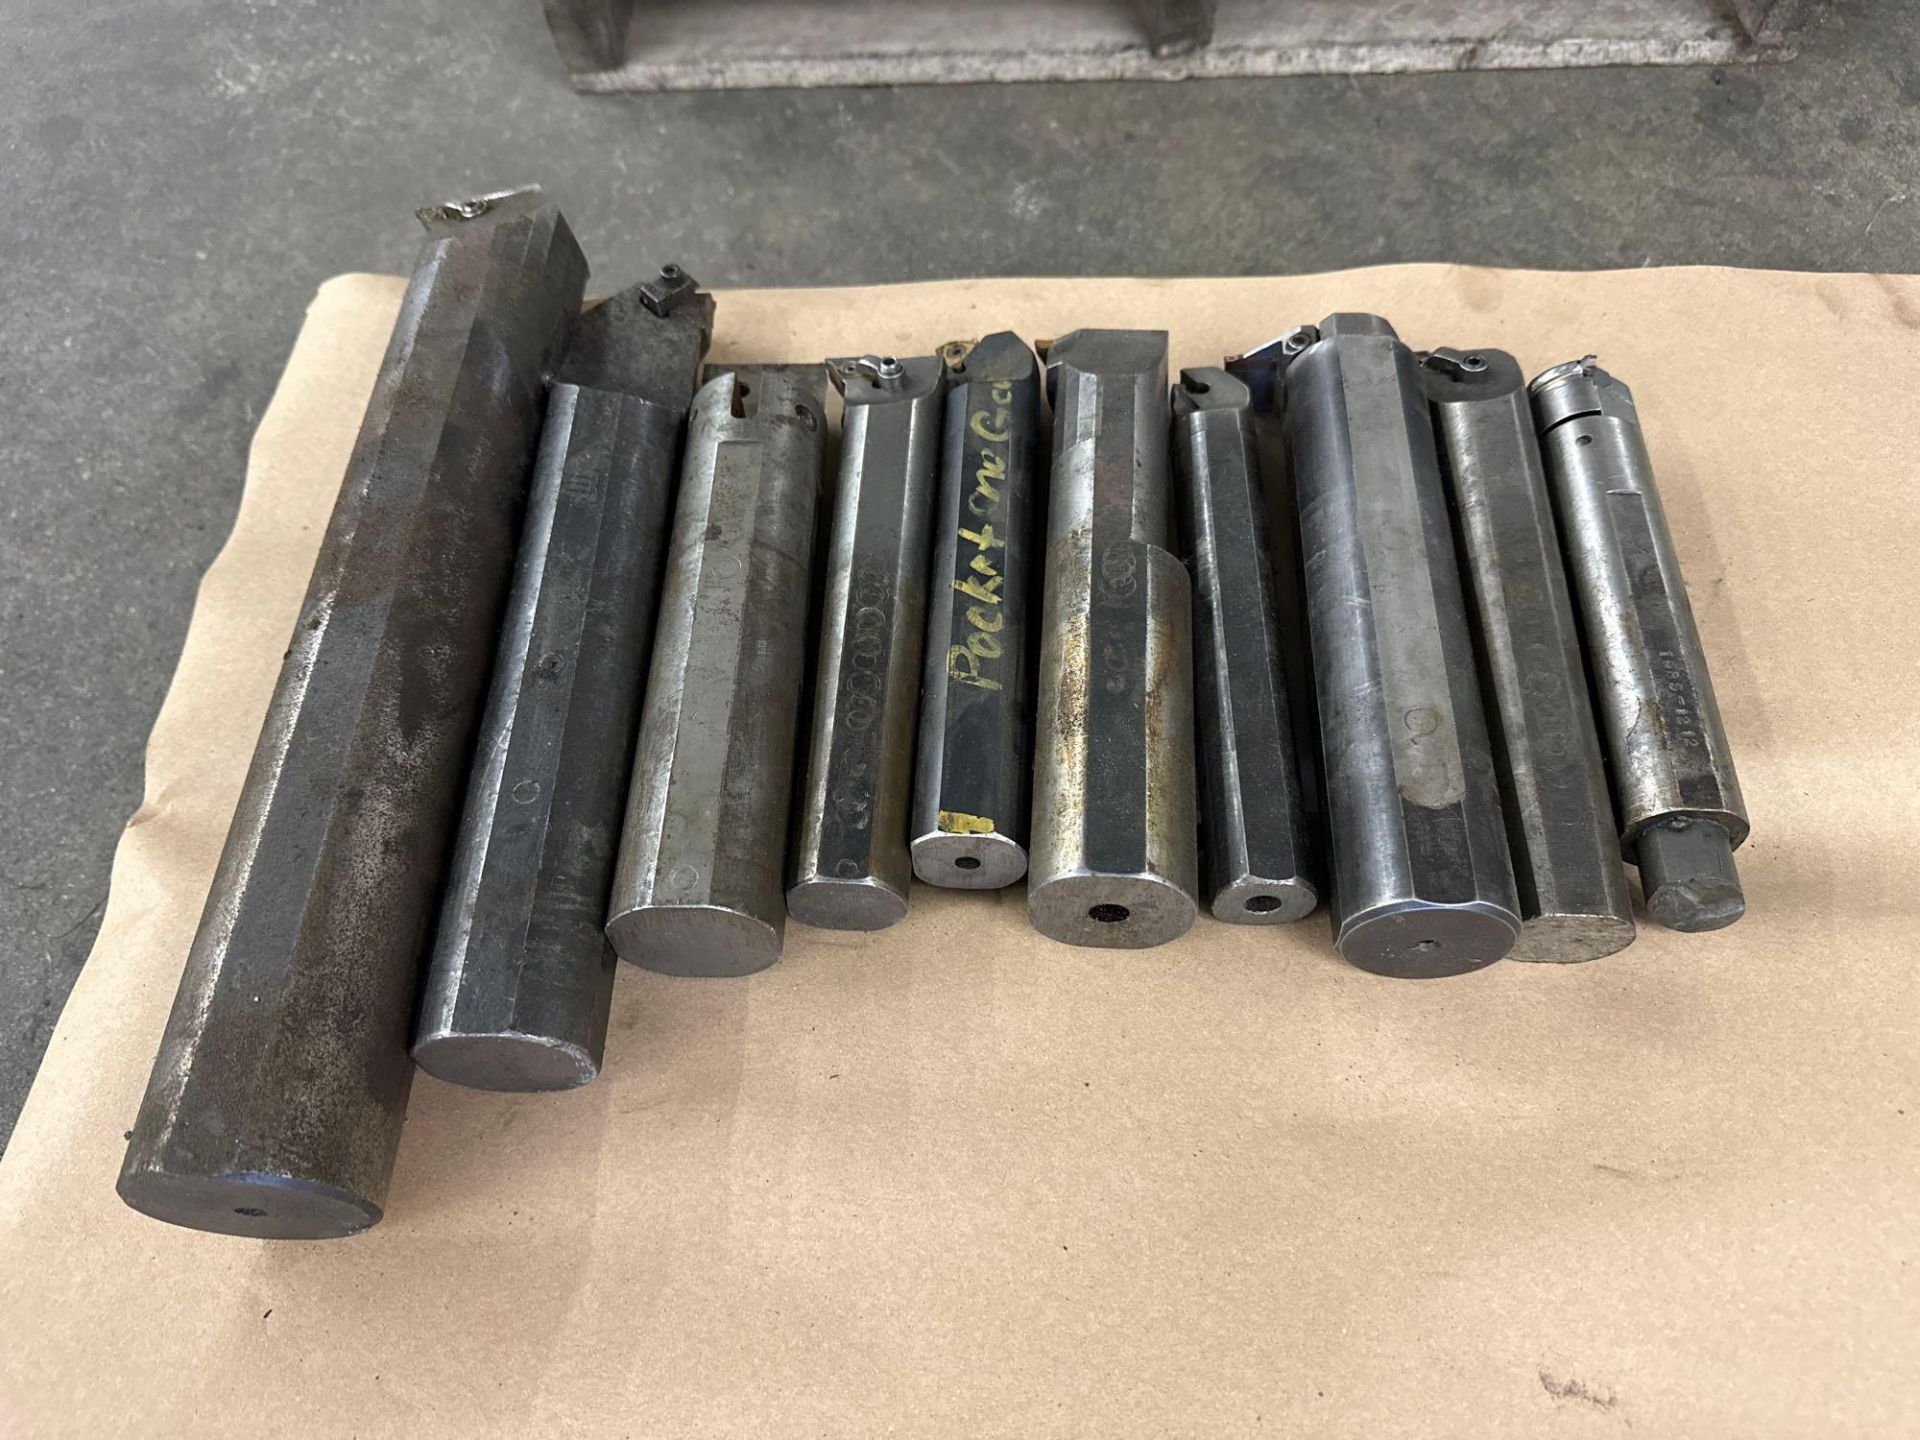 Lot of 10 Assorted Indexable Boring Bars Ranging From: 1 1/4” X 9 1/8” to 2 3/8” X 16” - Image 6 of 7